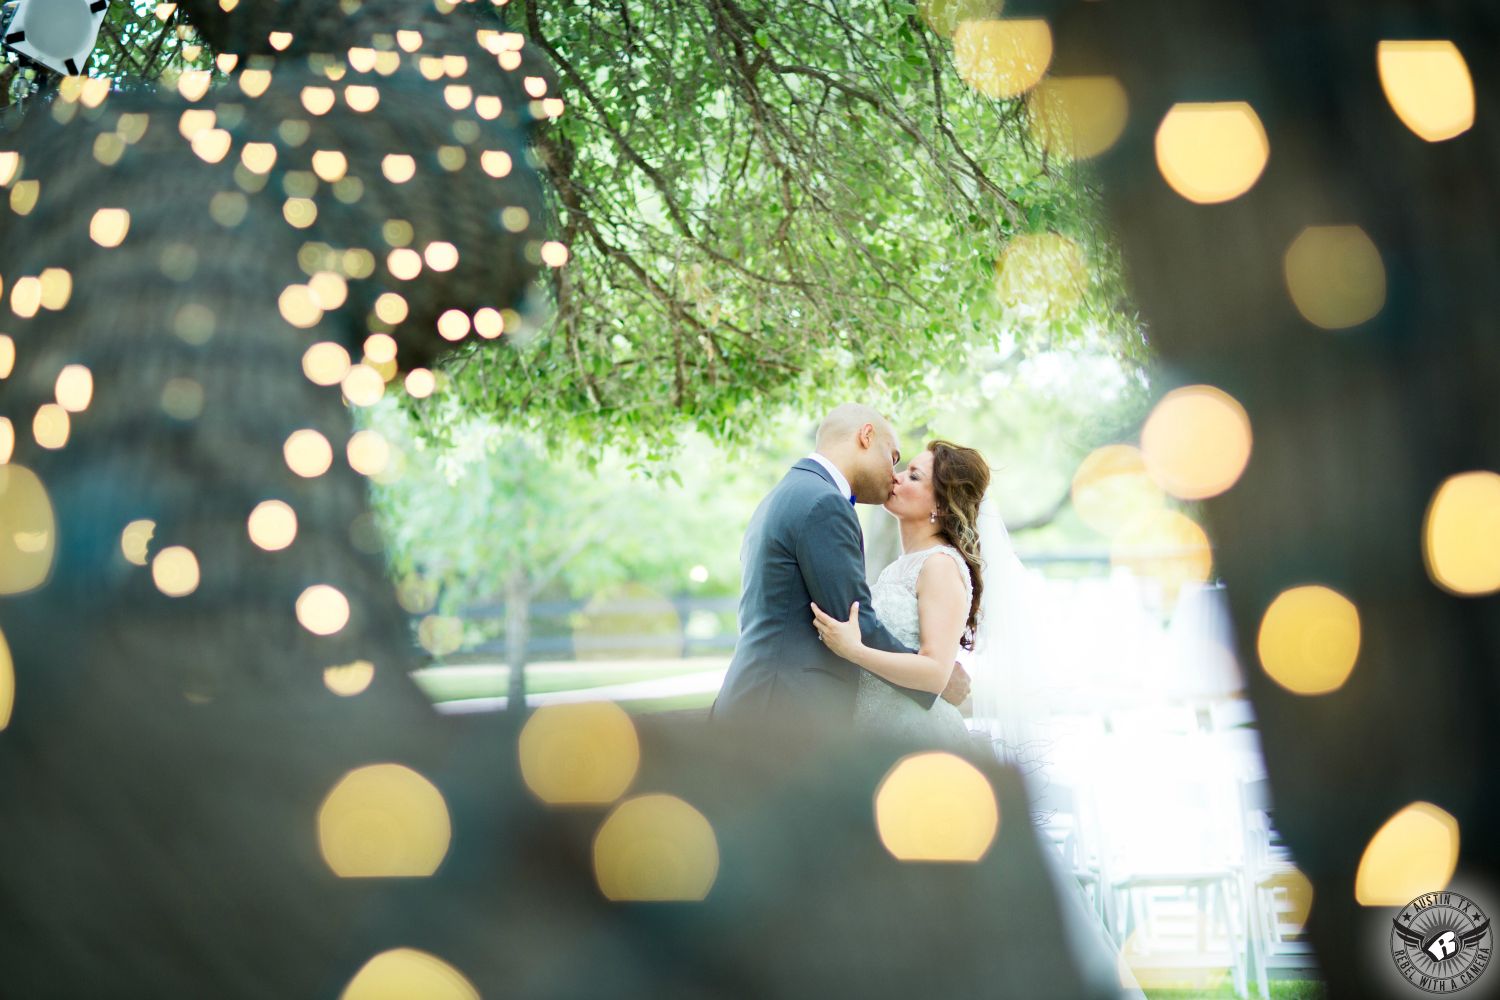 Bride in sparkly wedding dress and groom kiss passionately at their Austin wedding surrounded by the bokeh of twinkly lights in the trees at Antebellum Oaks Austin area wedding venue in Lakeway.